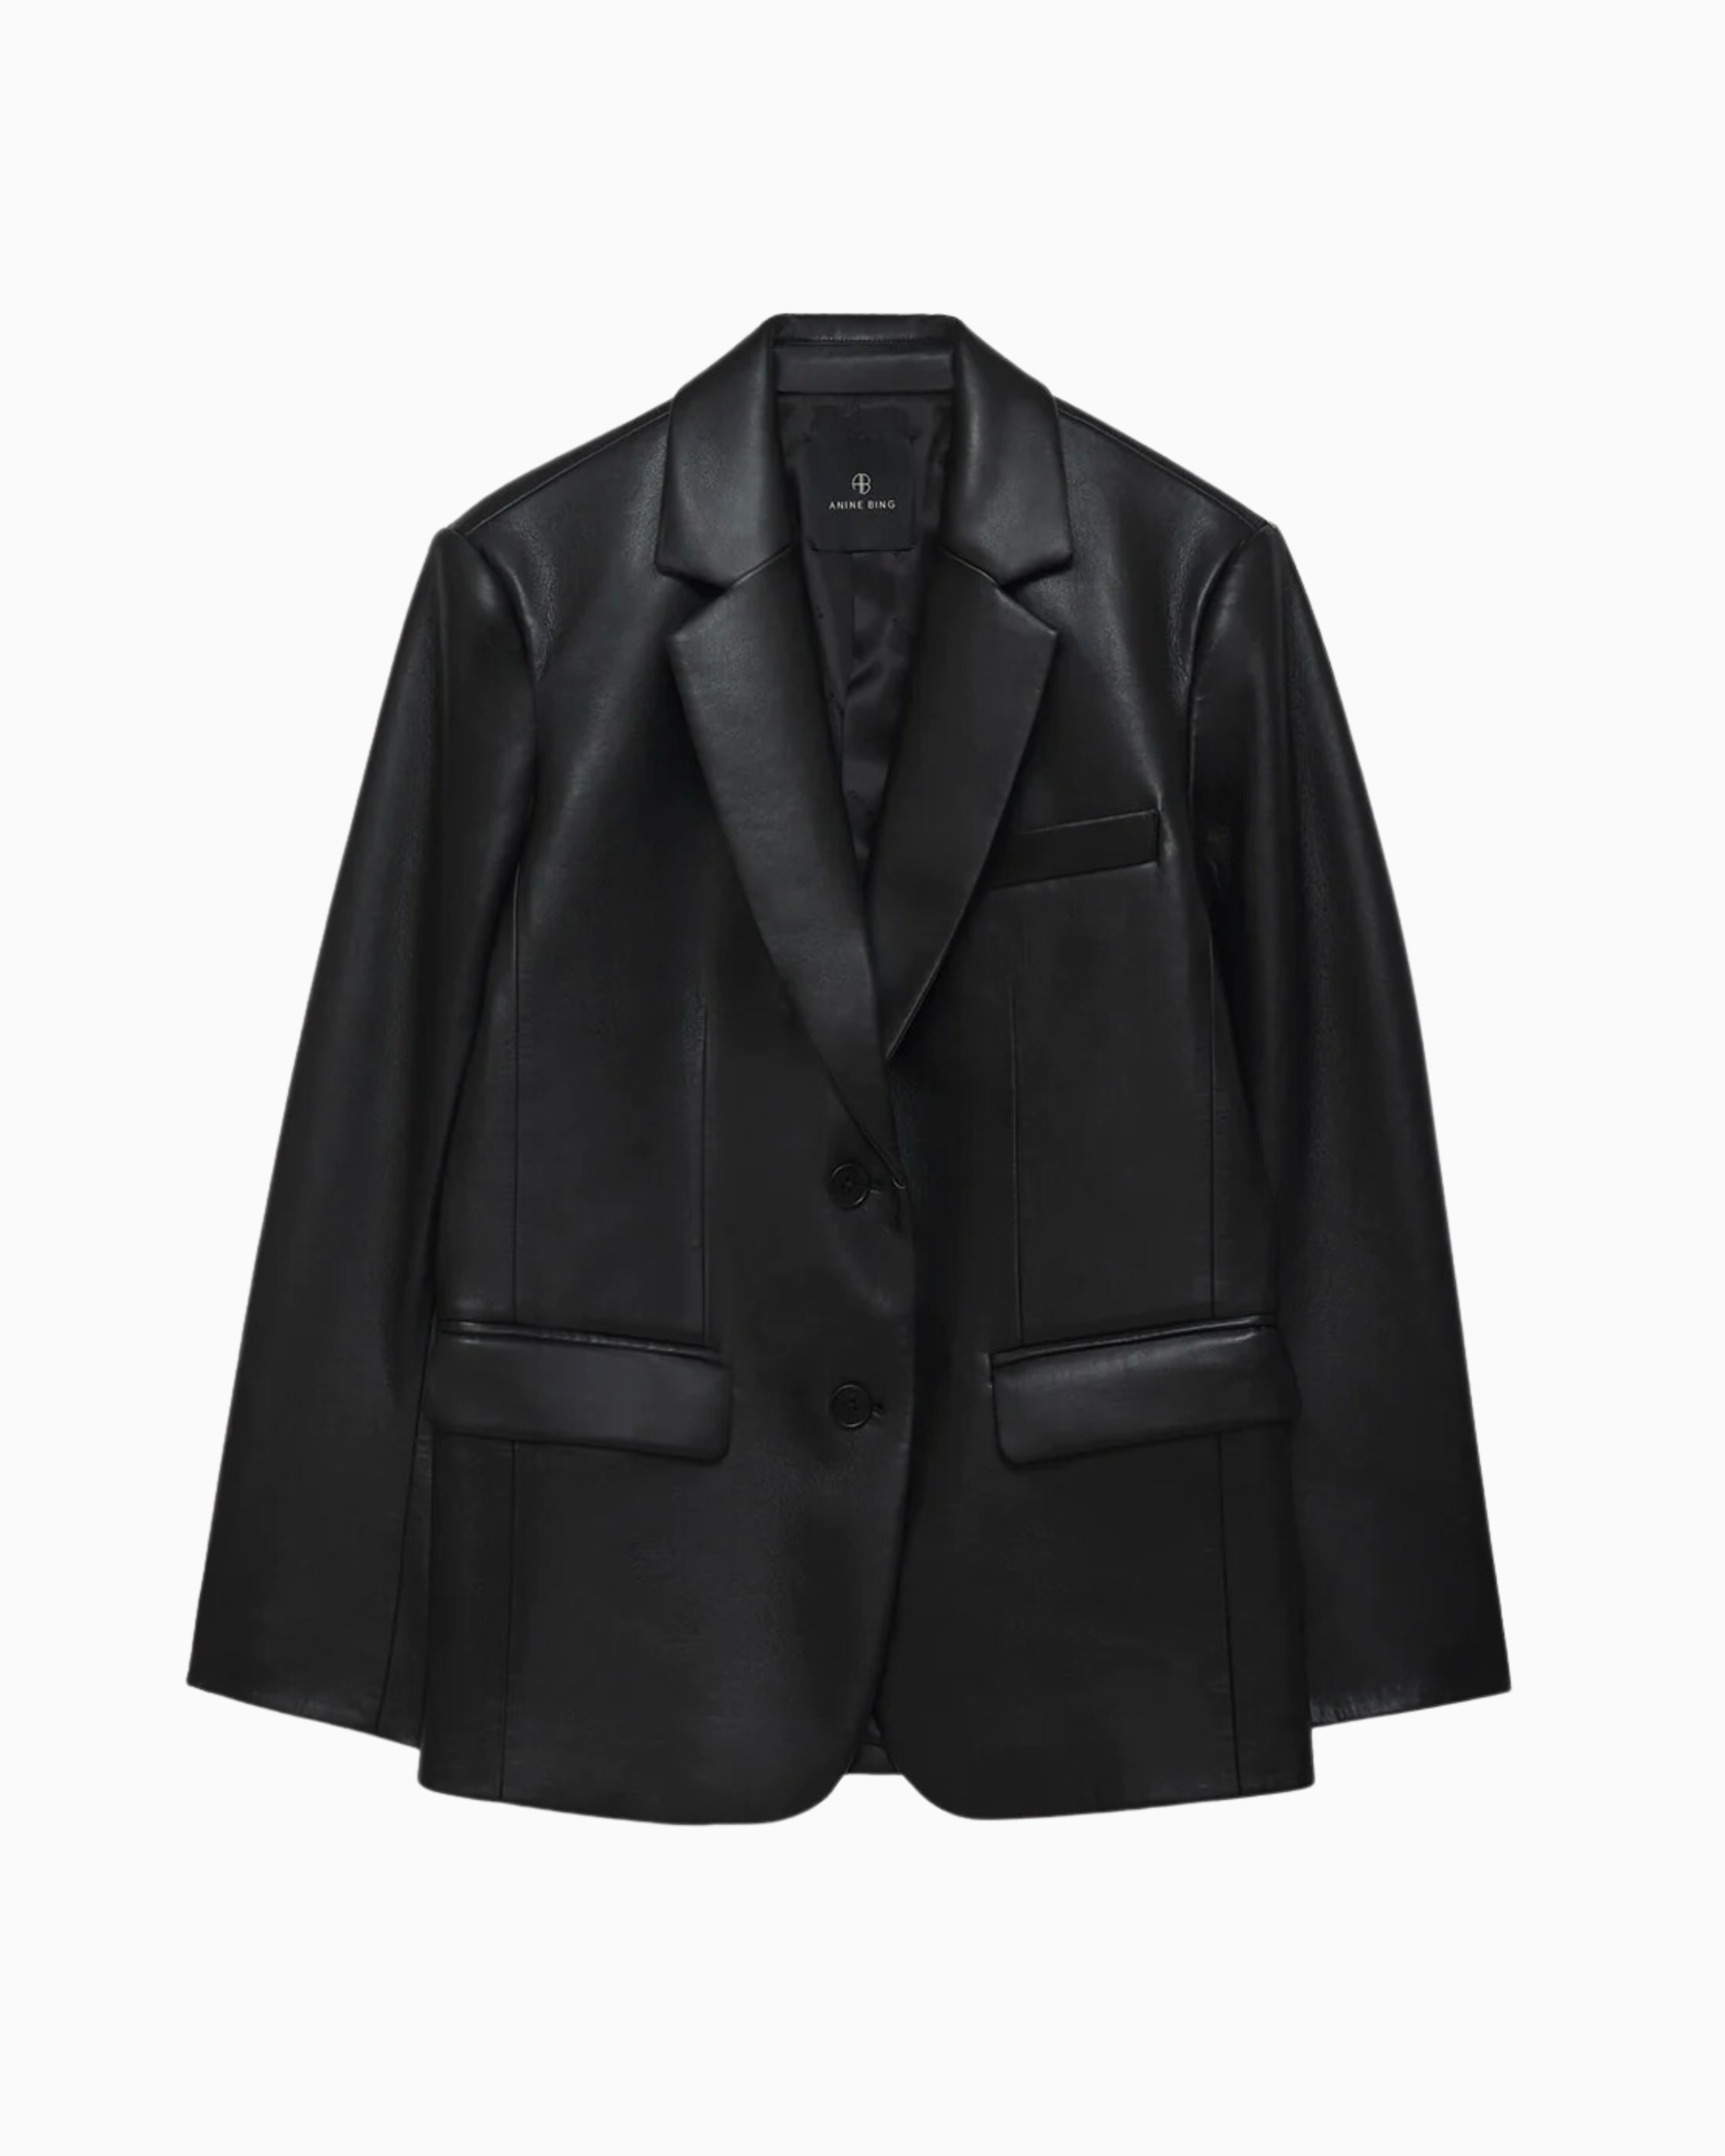 Anine Bing Classic Blazer in Black Recycled Leather